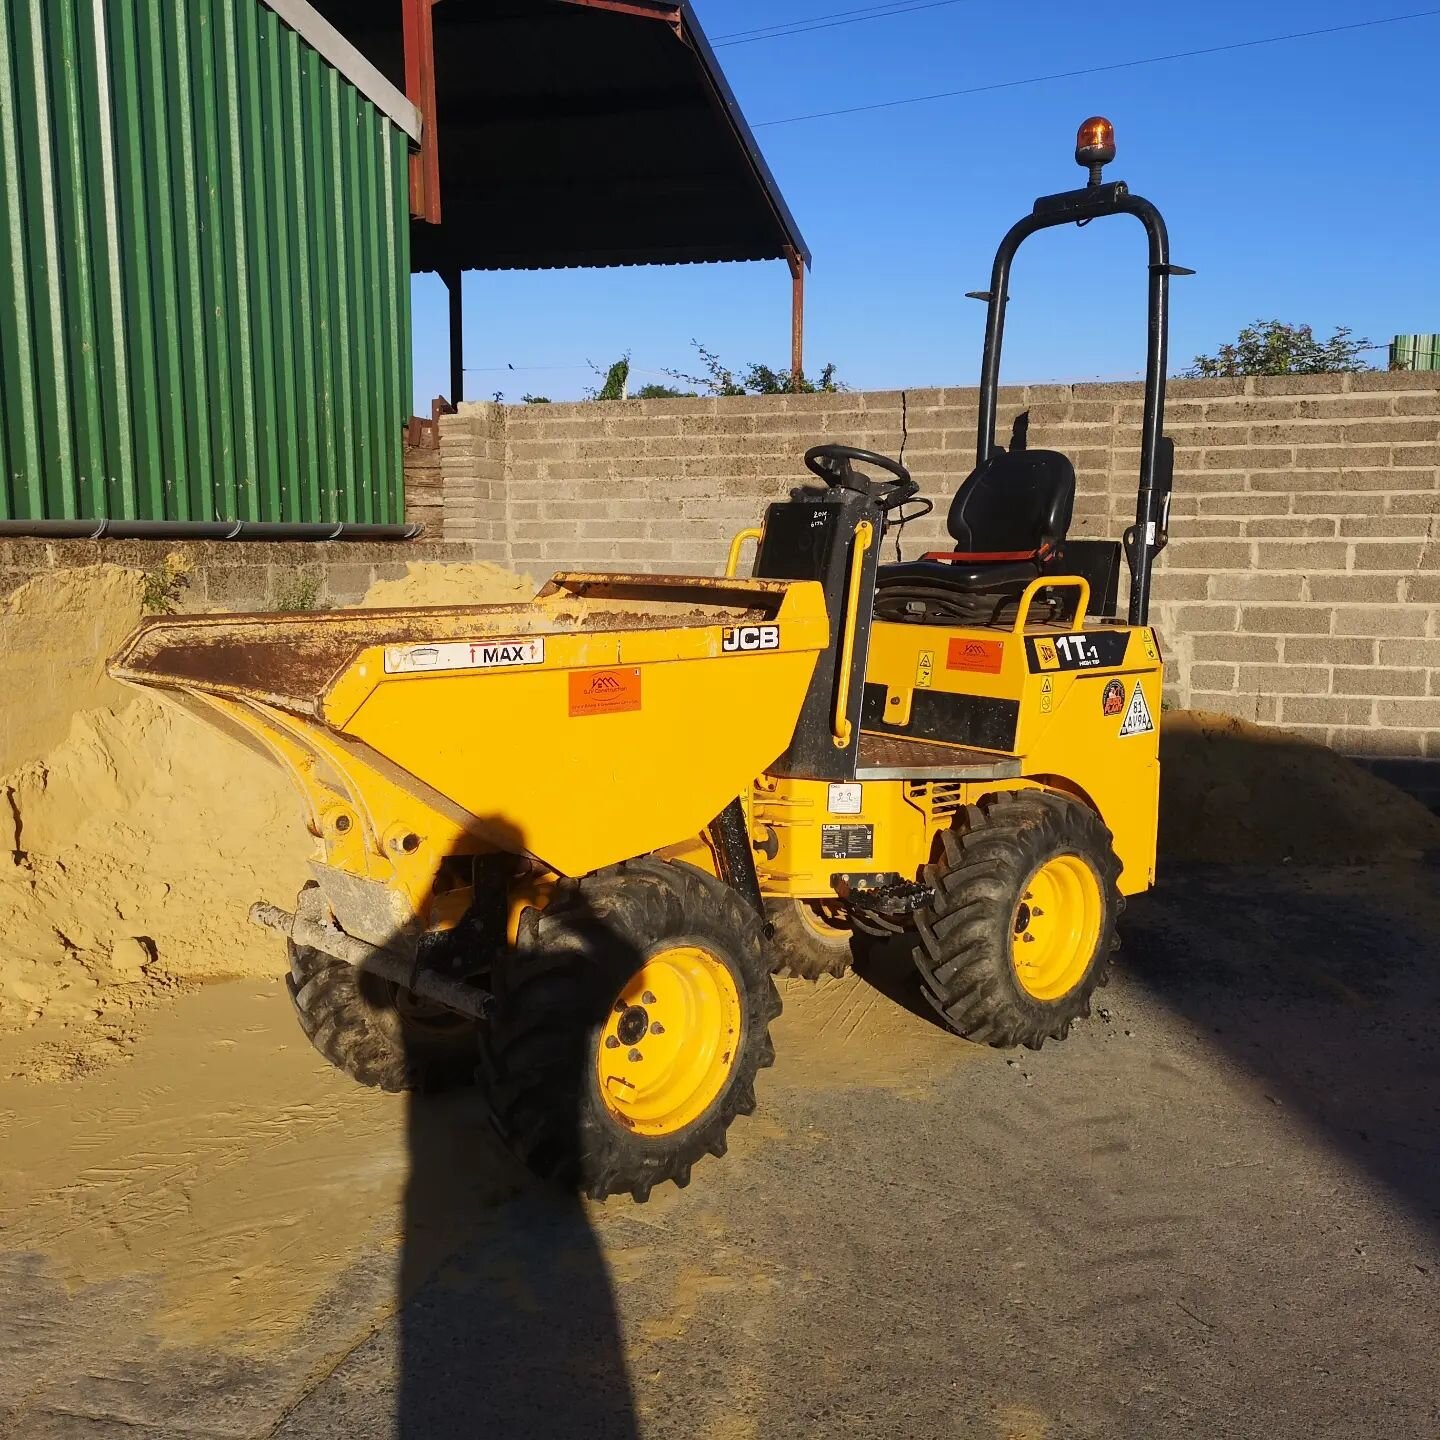 🟠 New machines update 🟠

🟠 It's been an exciting week at SJV headquarters 🤩 we've taken delivery of a new to us 1 ton high tip dumper and a 1.7 ton mini digger to help keep up with are work load. The team are looking forward to putting them strai